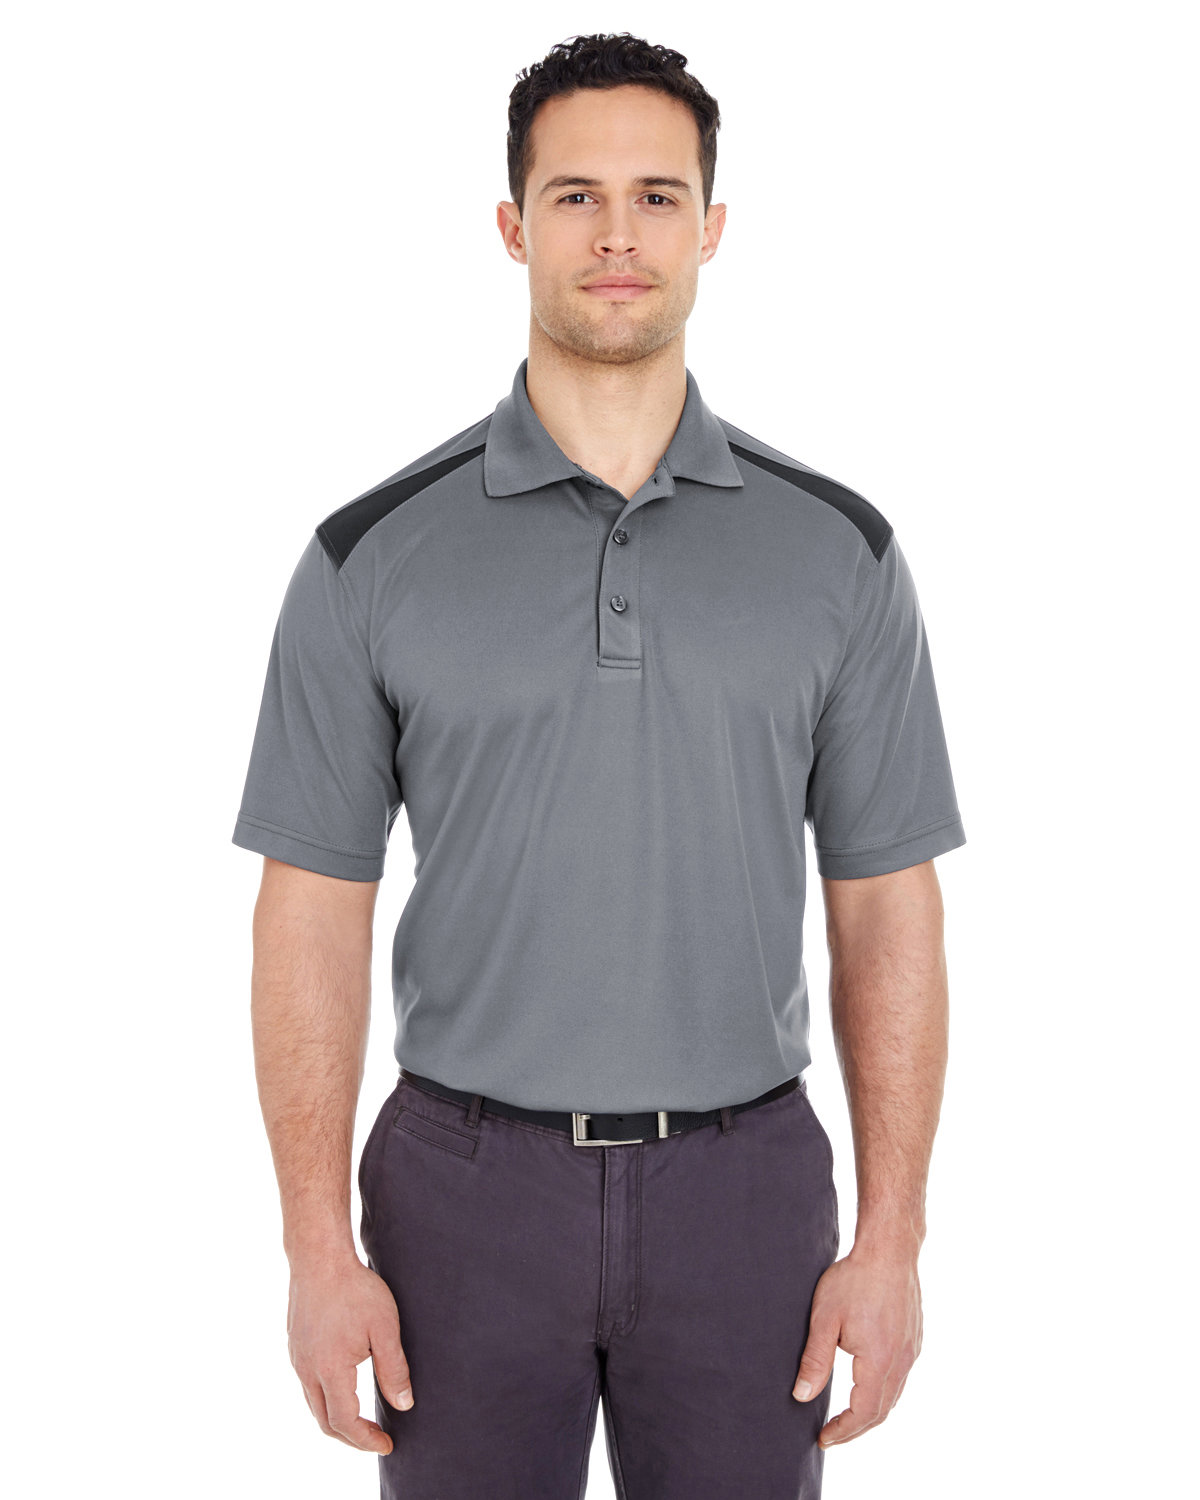 Adult Cool & Dry Two-Tone Mesh Pique Polo-UltraClub